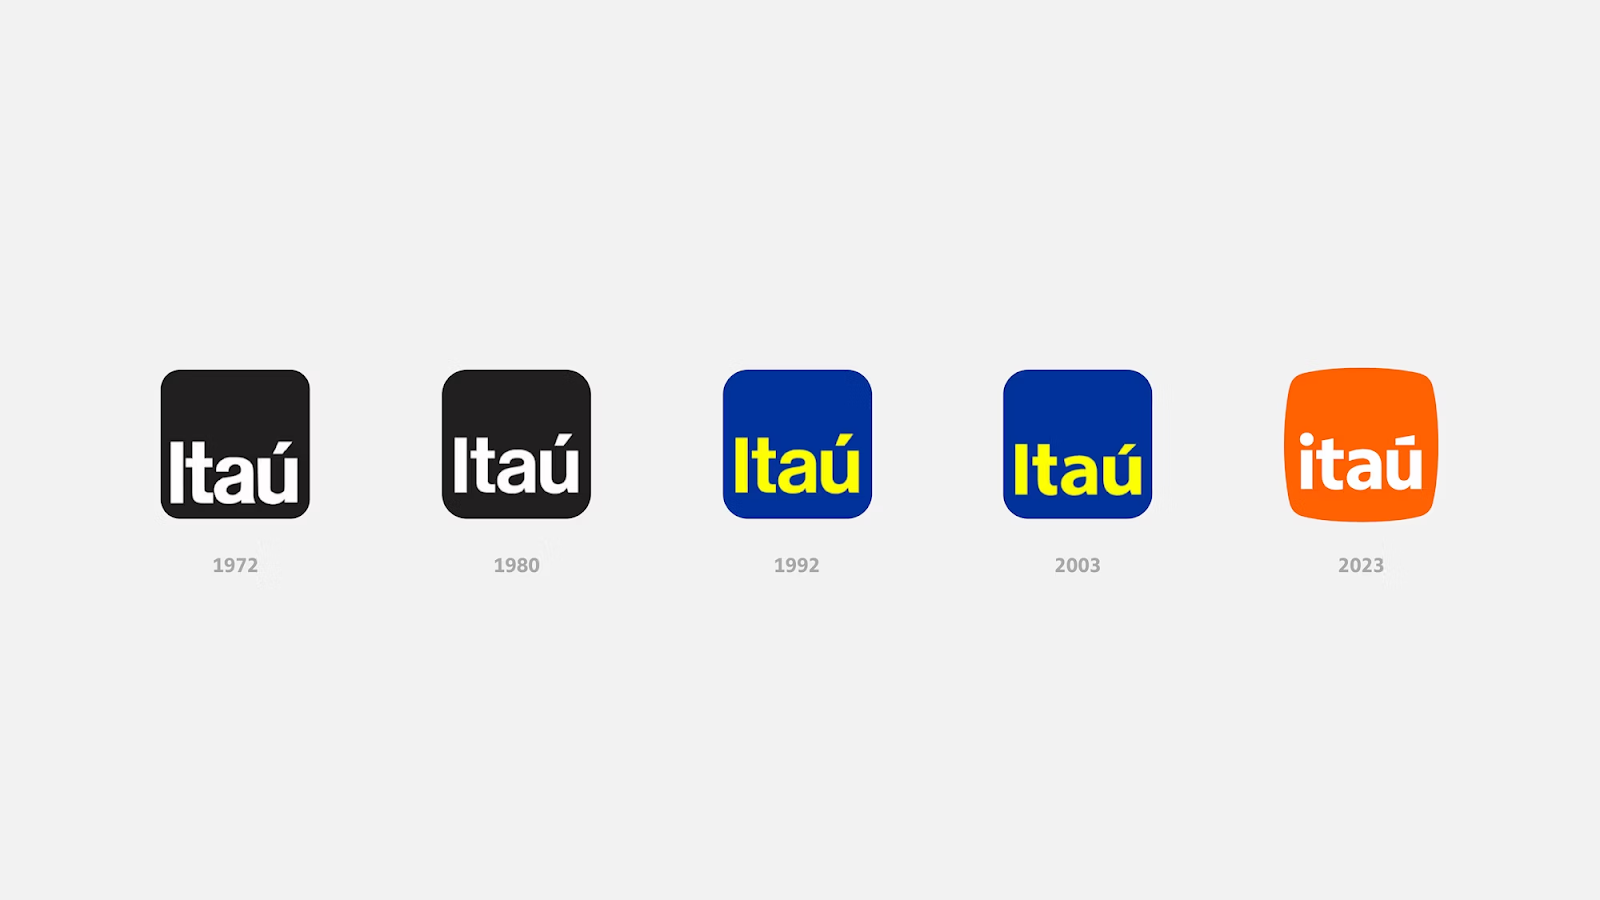 Artifact from the Exploring Banco Itaú's New Branding and Visual Identity by Pentagram article on Abduzeedo